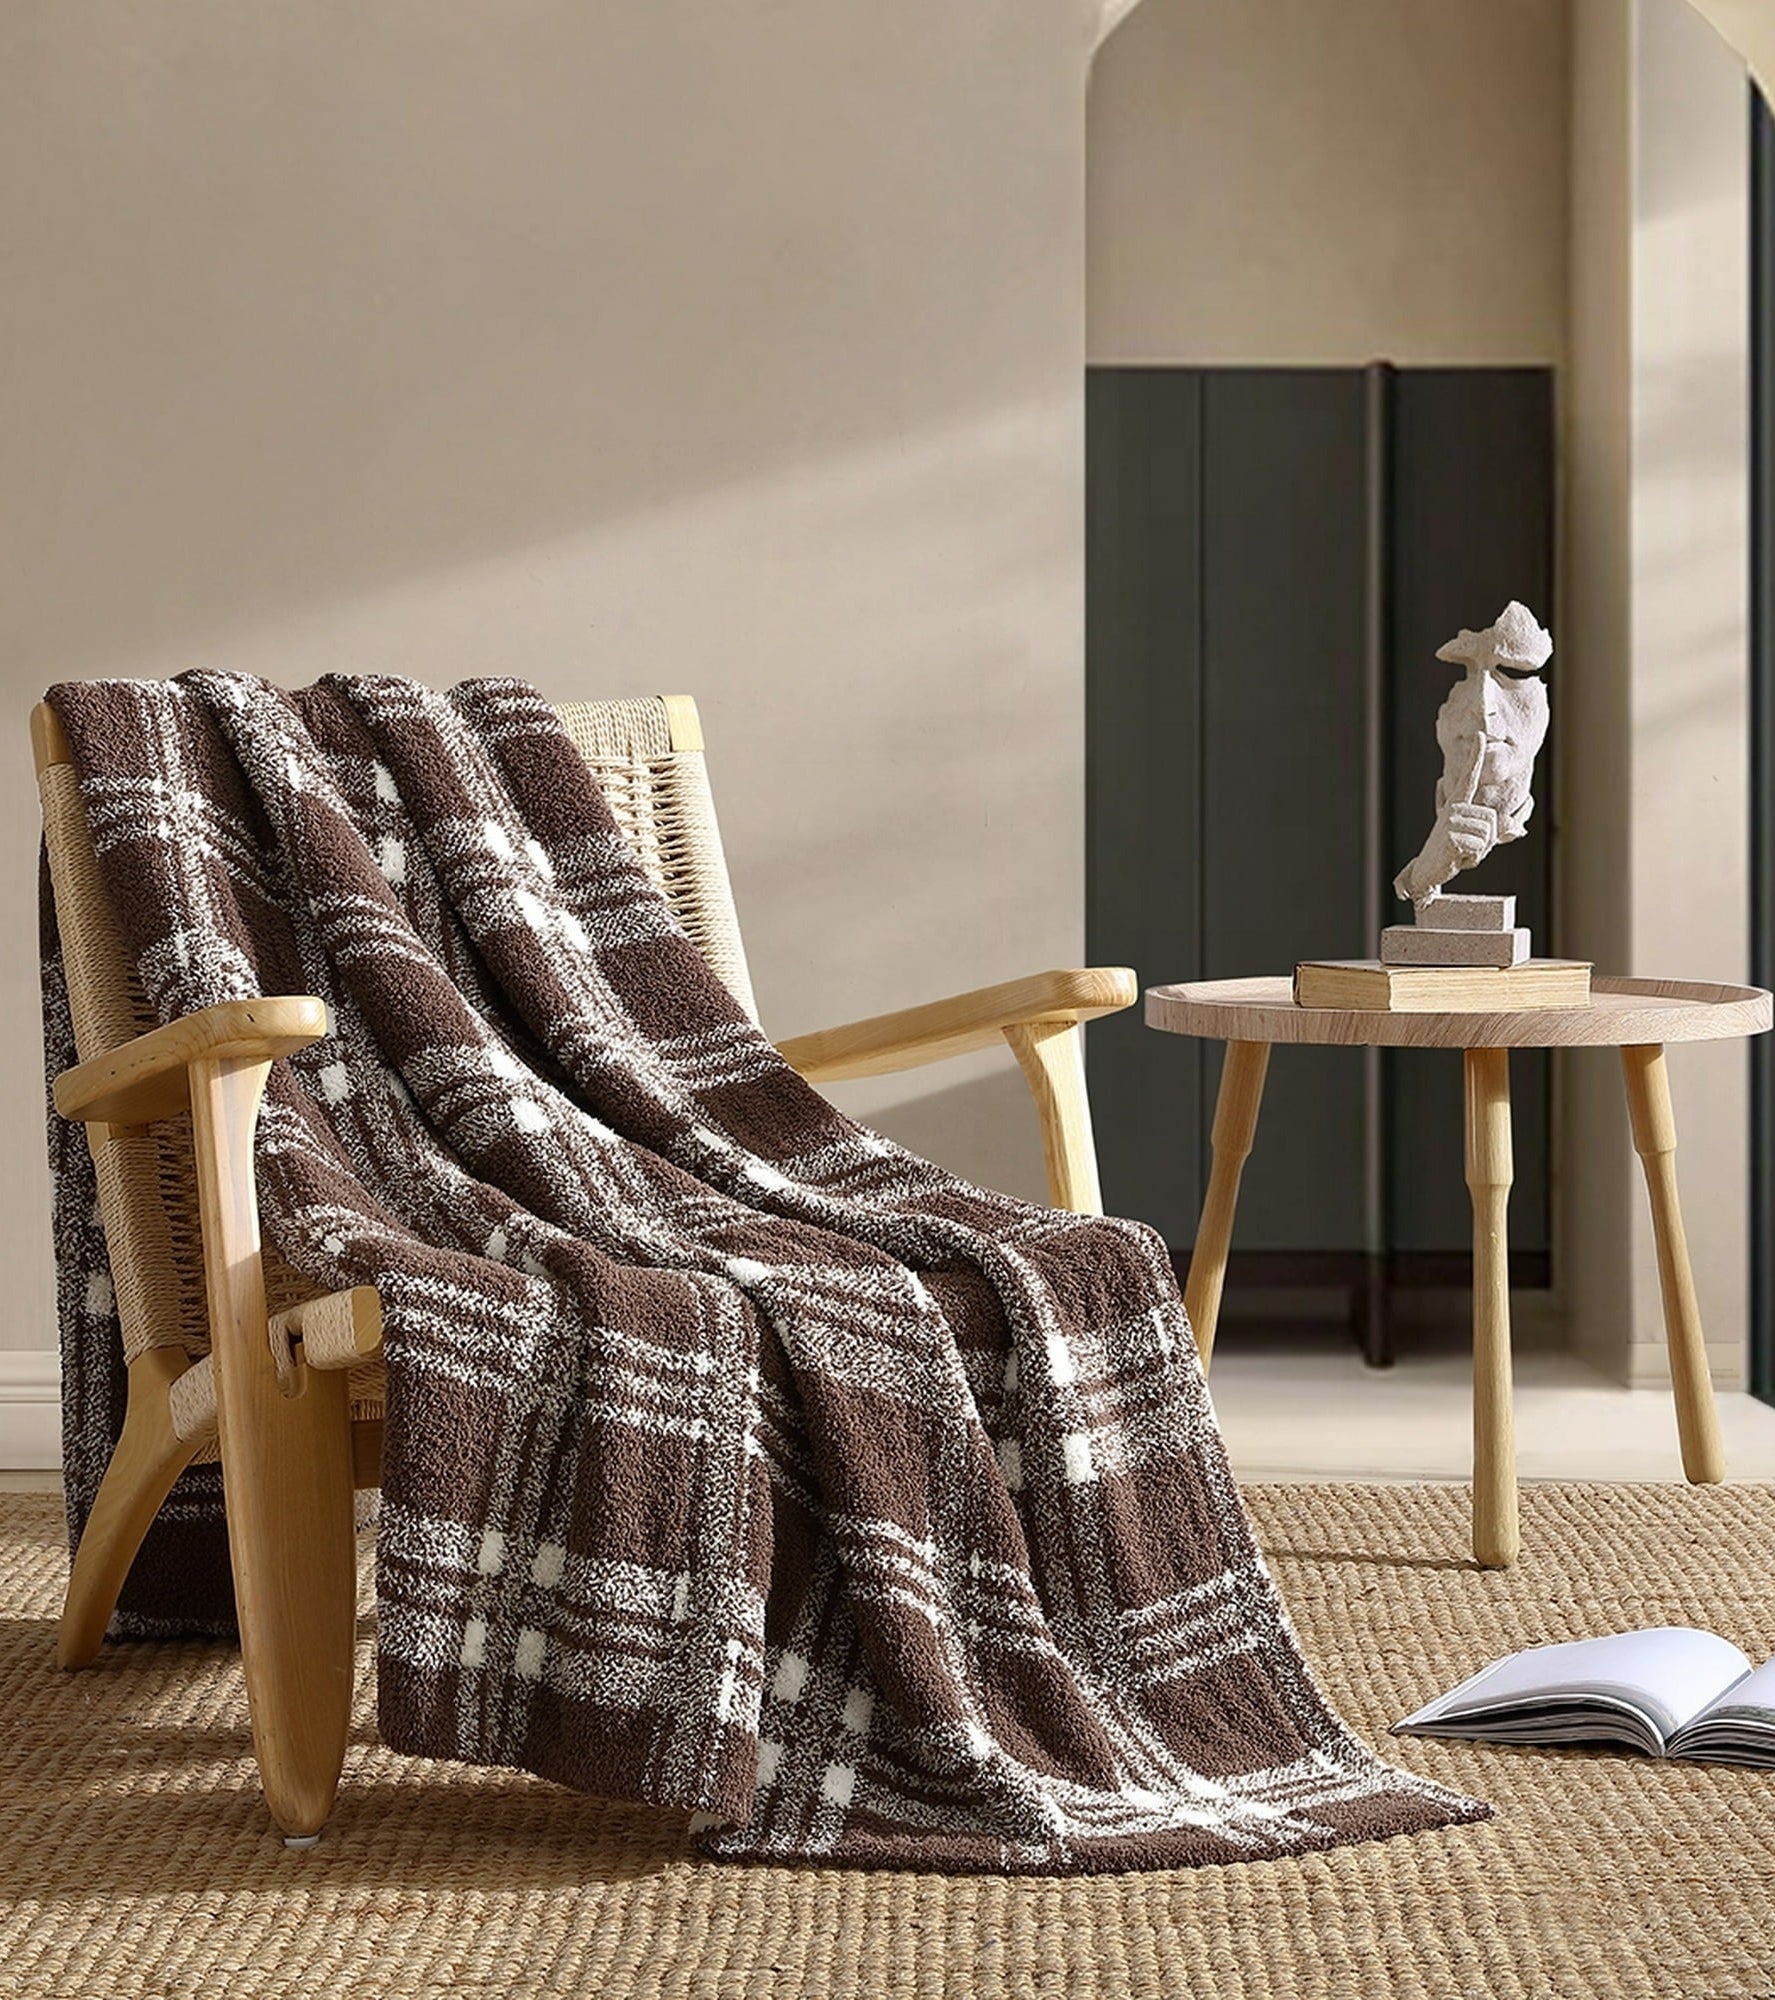 brown and white throw blanket on chair